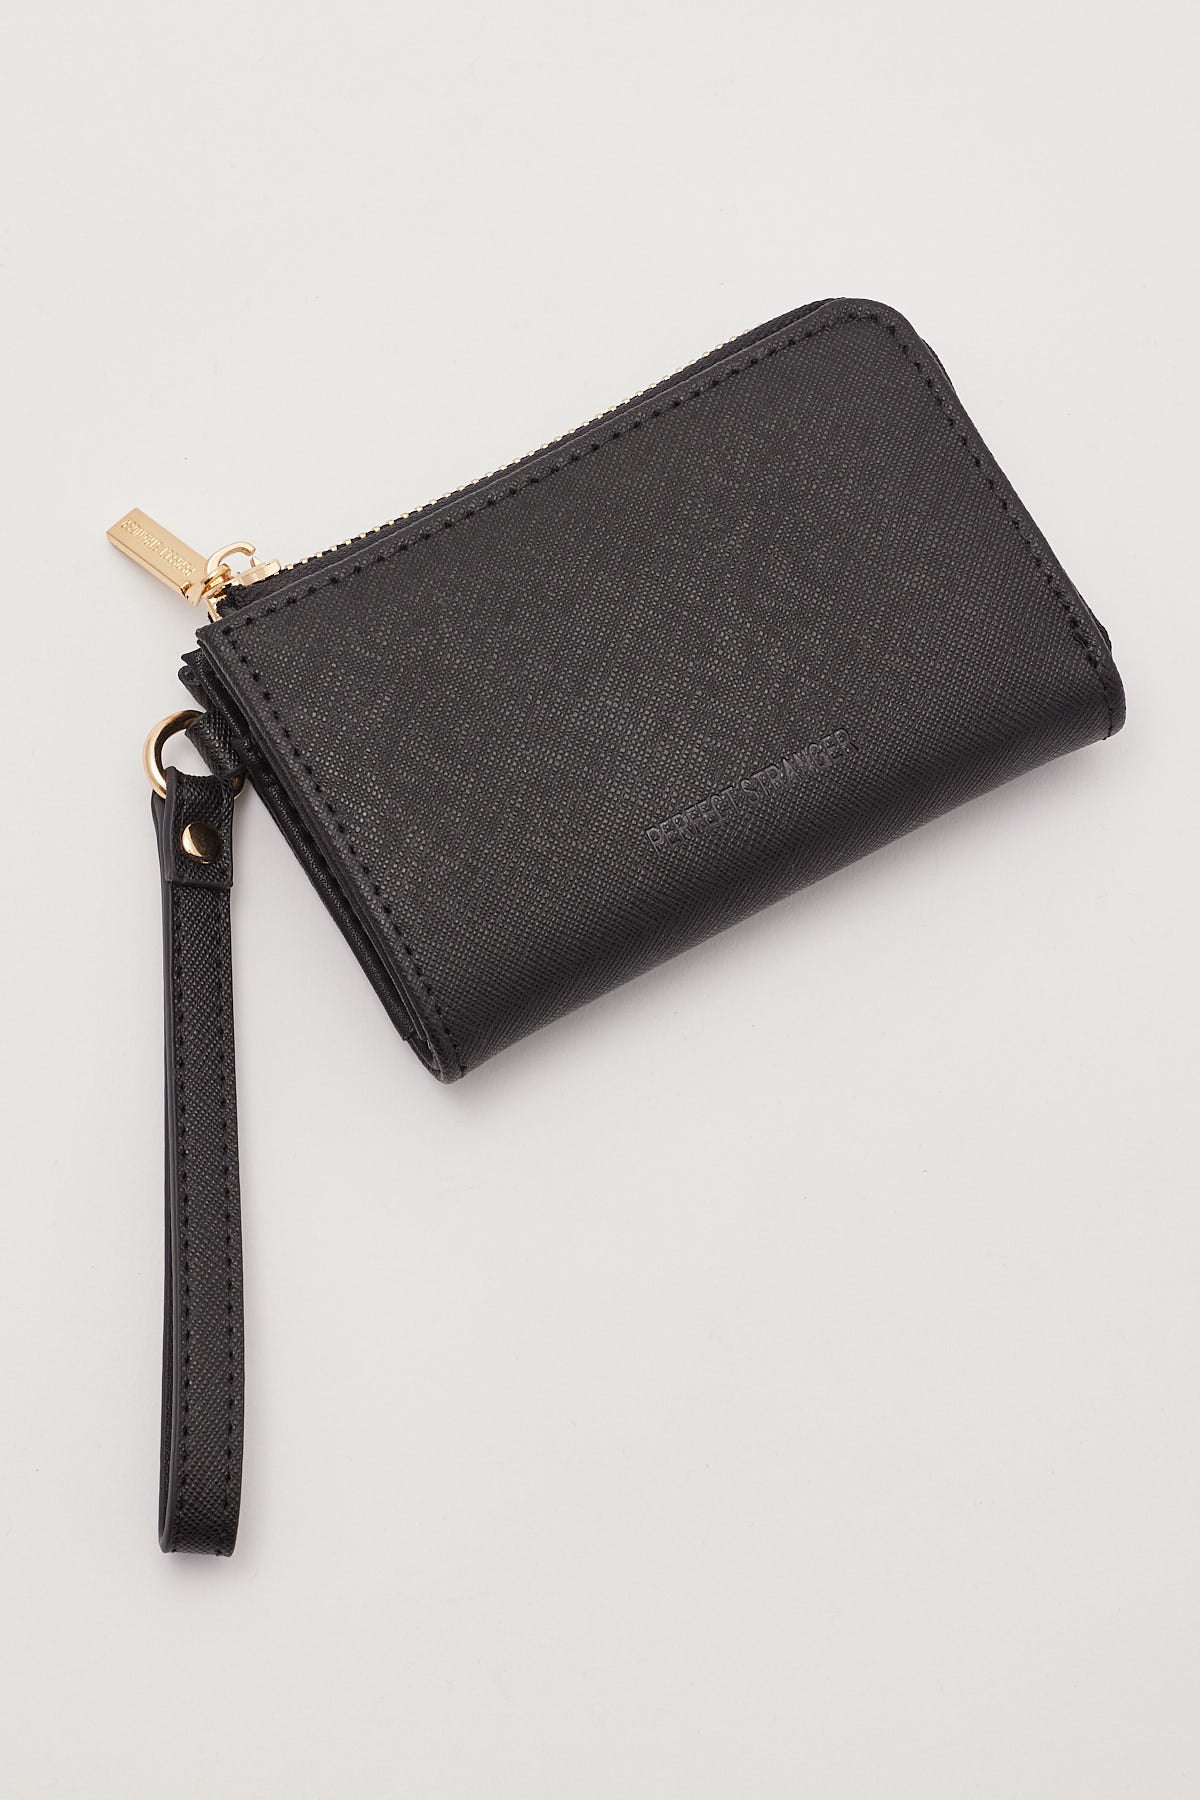 Perfect Stranger Cleo Leather Wallet Black